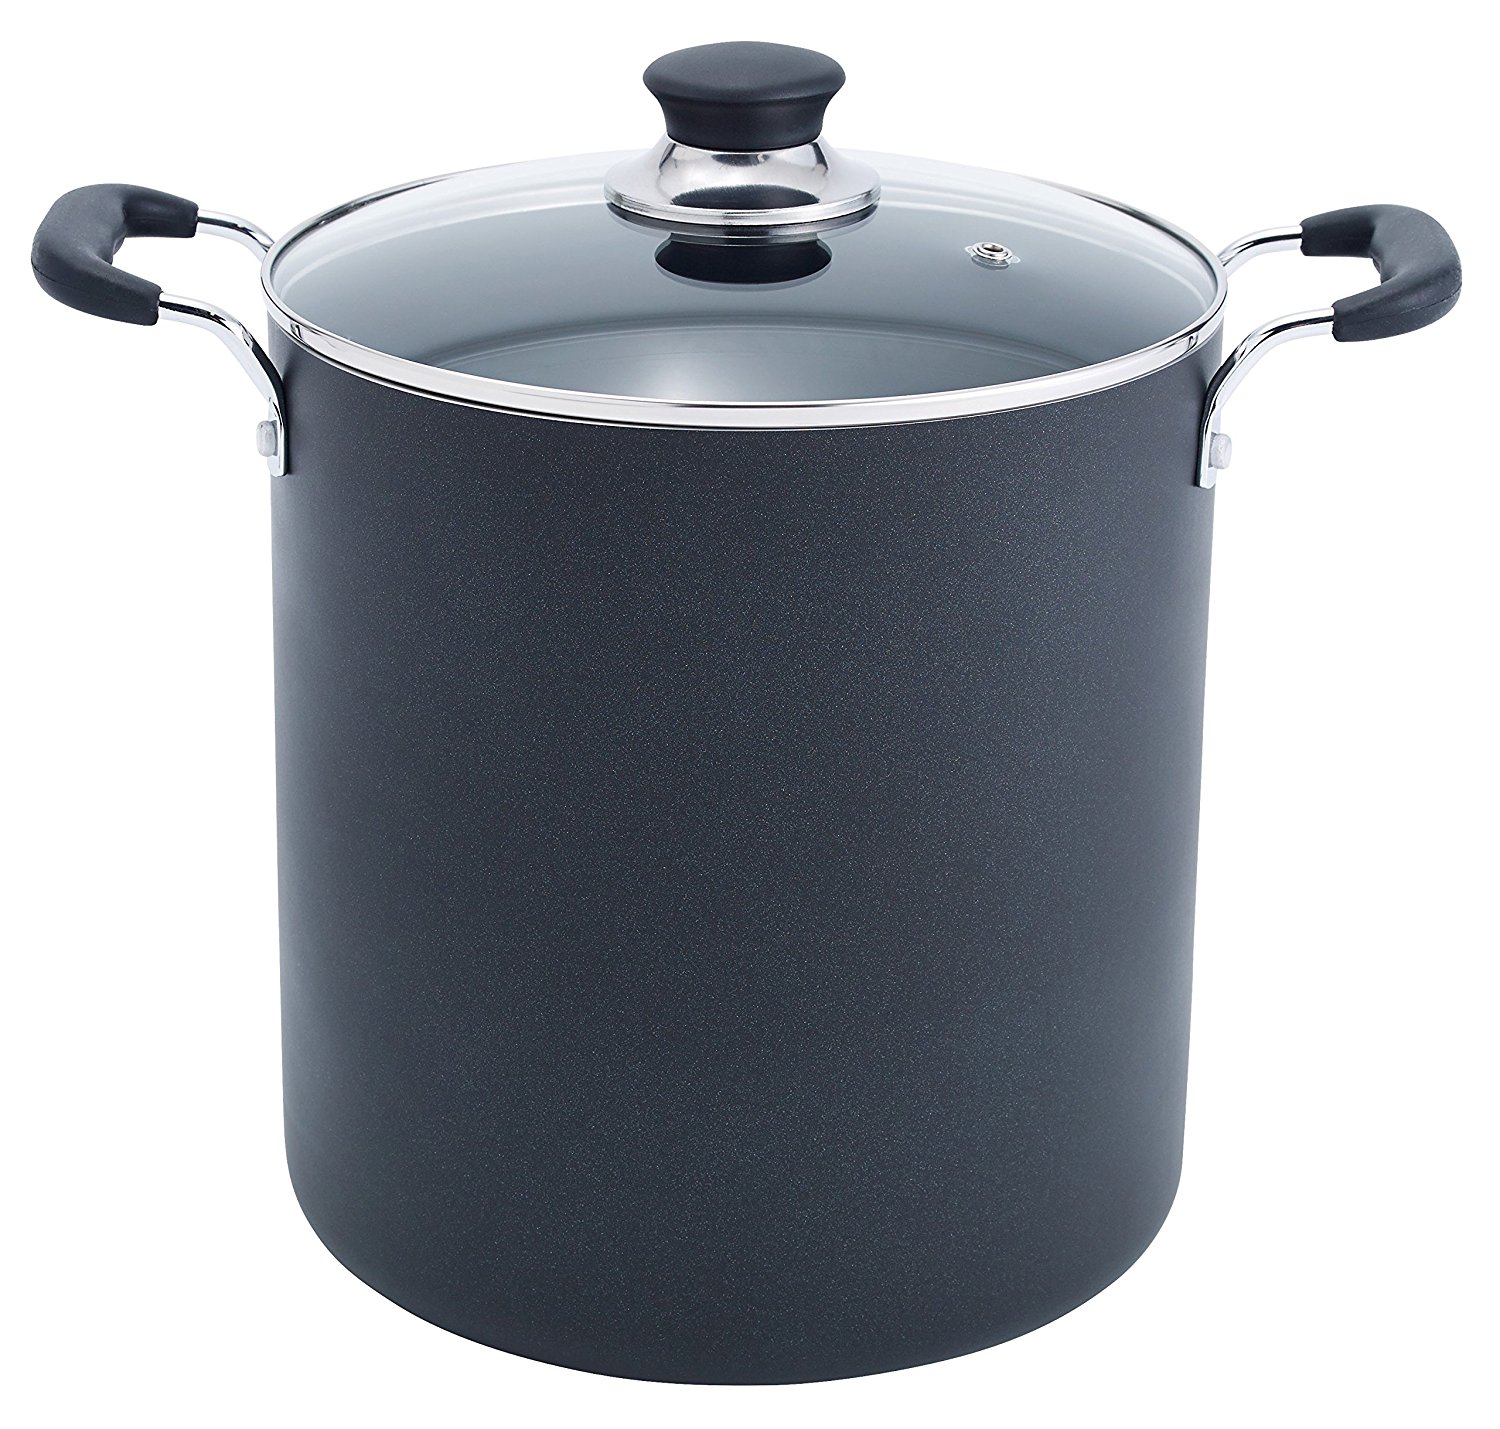 T-fal Specialty Total Nonstick Stockpot 12 Quart Only $29.99!